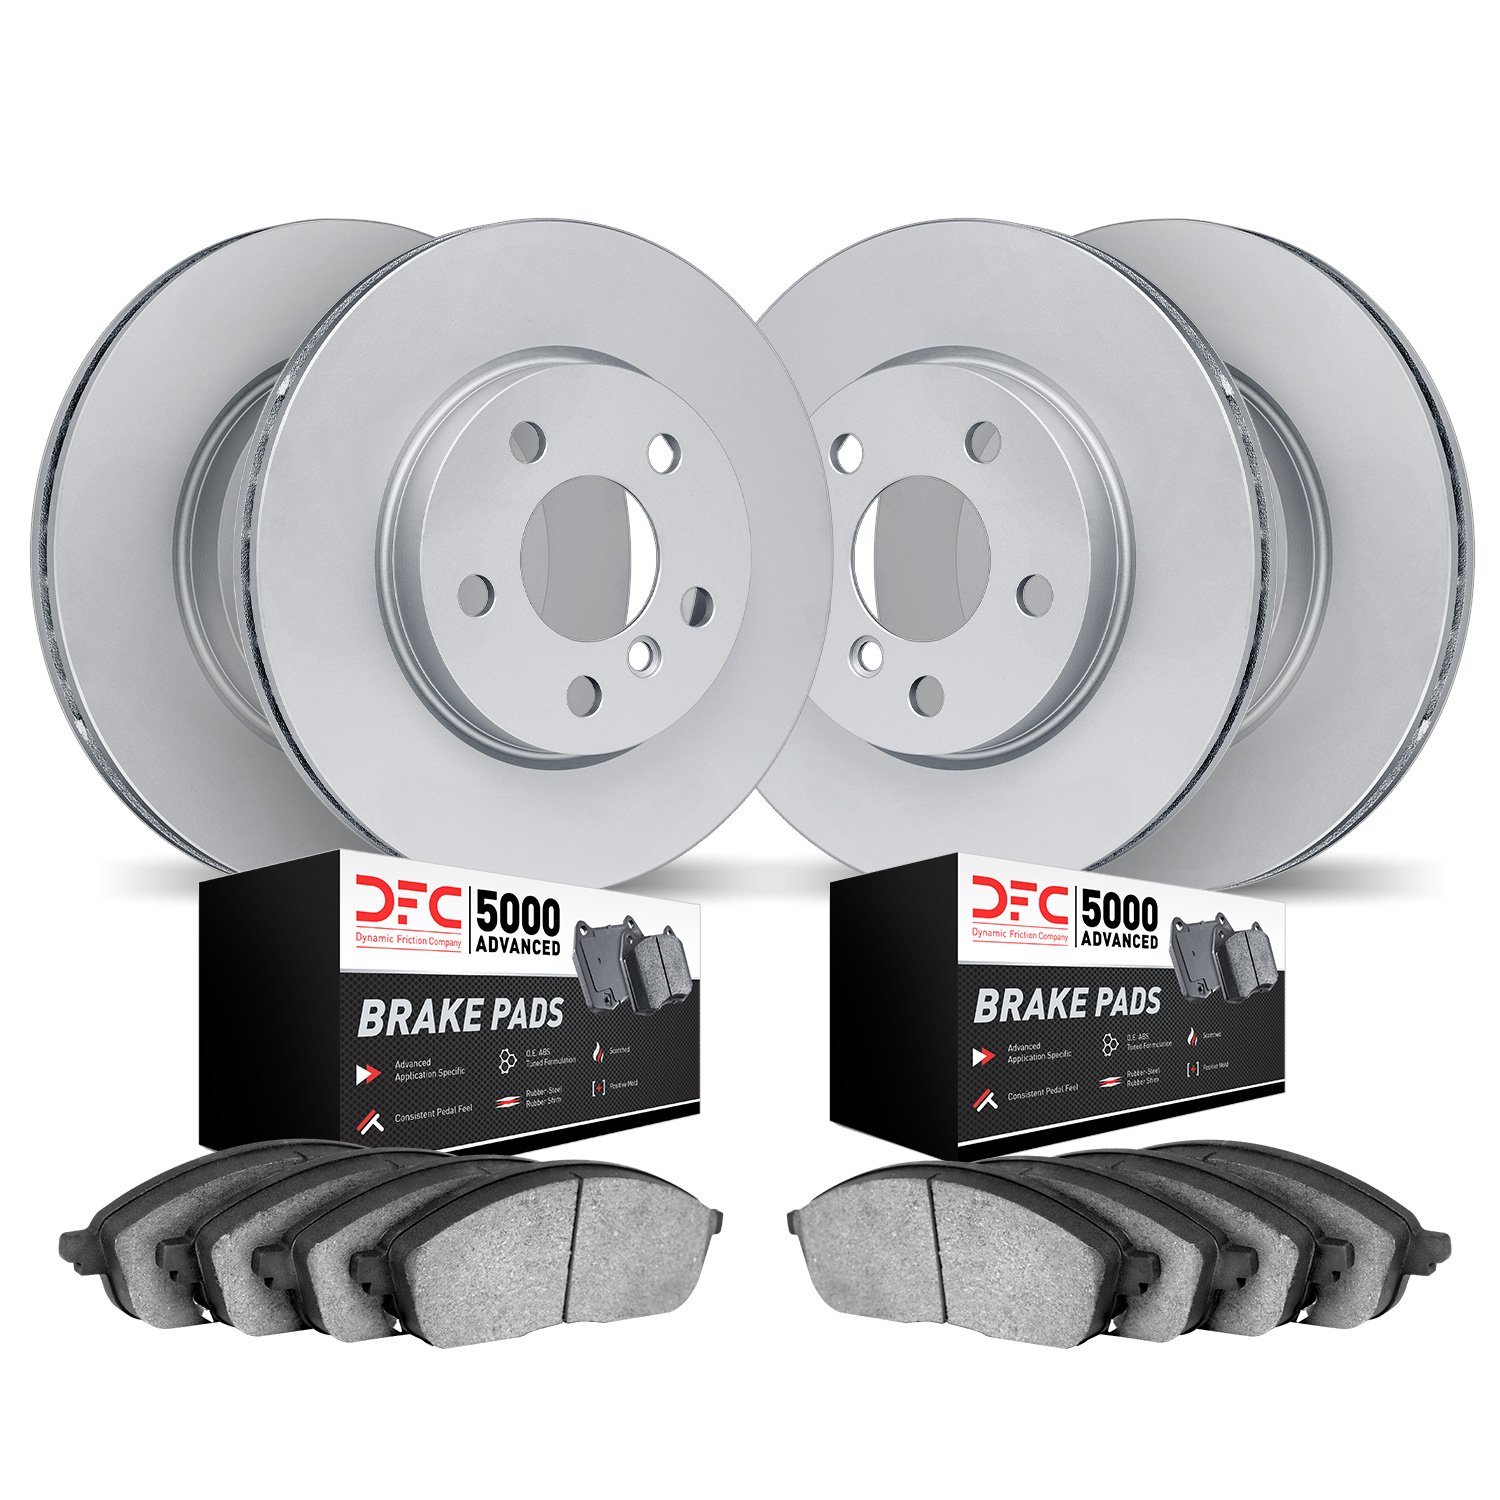 9504-46026 GEOMET Brake Rotors w/5000 Advanced Brake Pads Kit, Fits Select GM, Position: Front and Rear